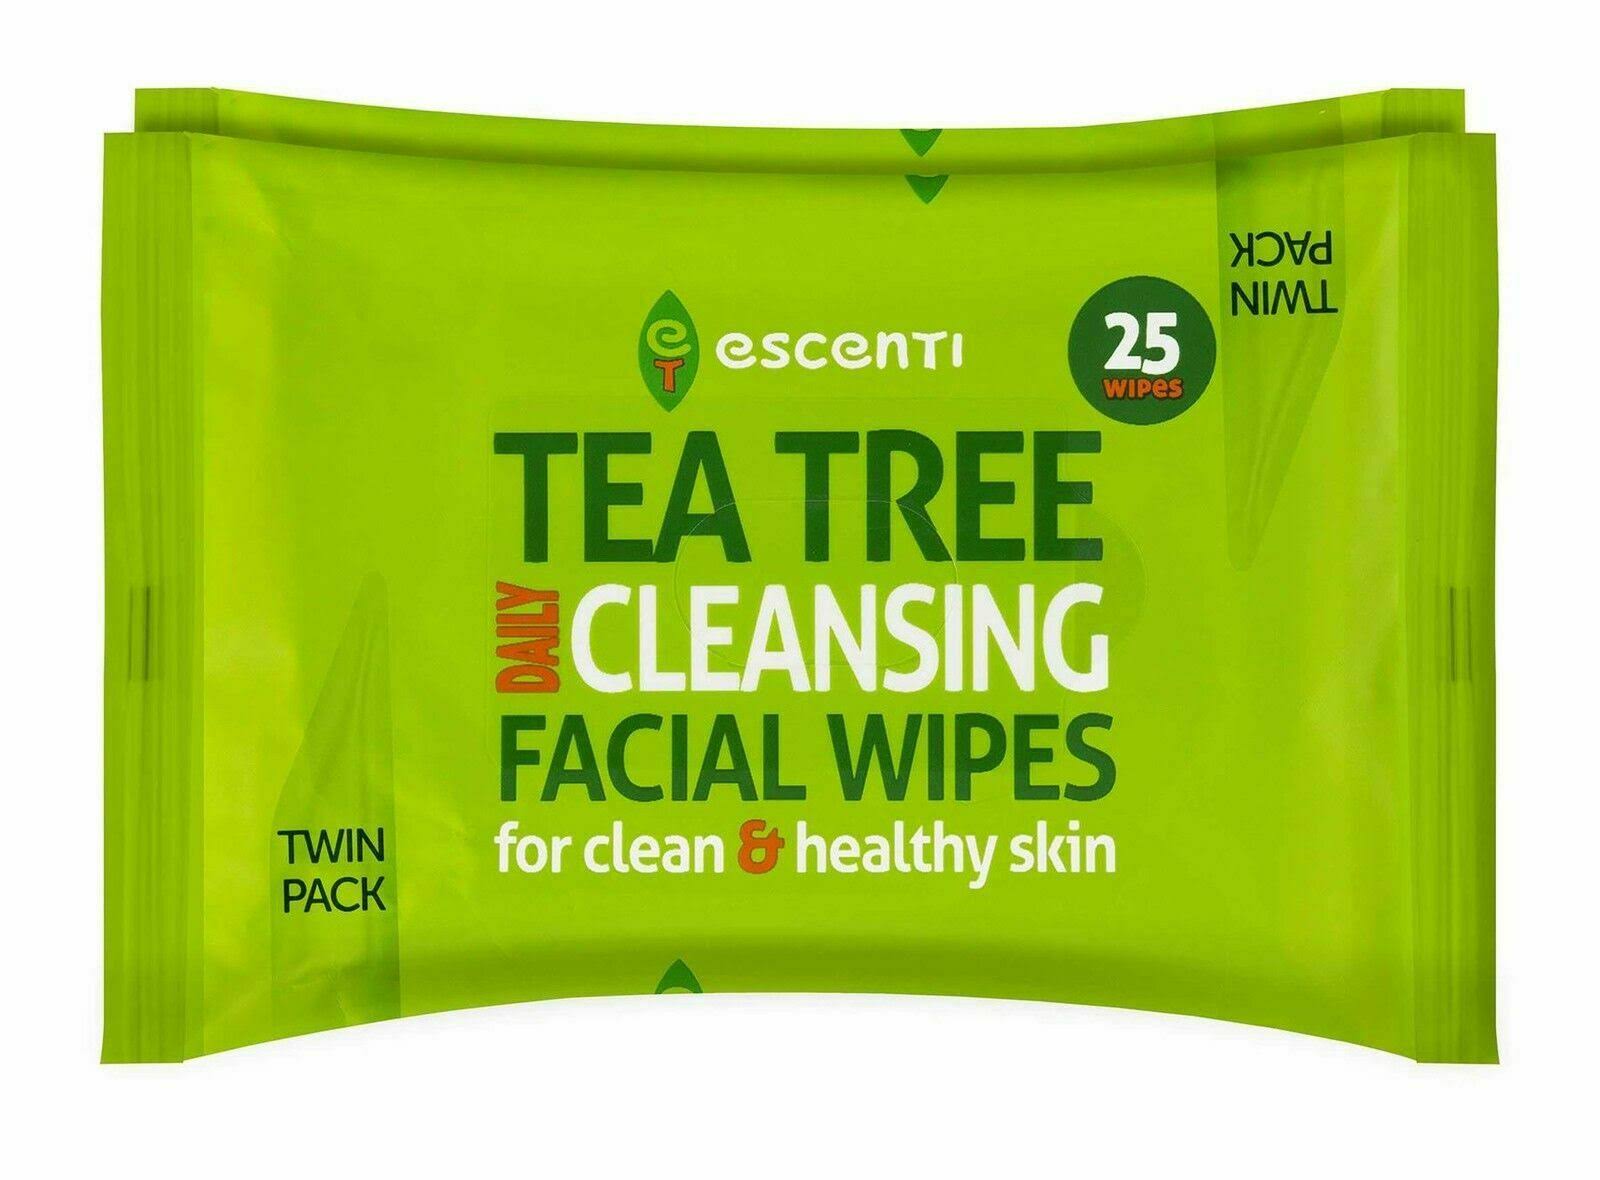 Escenti Tea Tree Daily Cleansing Facial Makeup Wipes - 6 Packs of 25